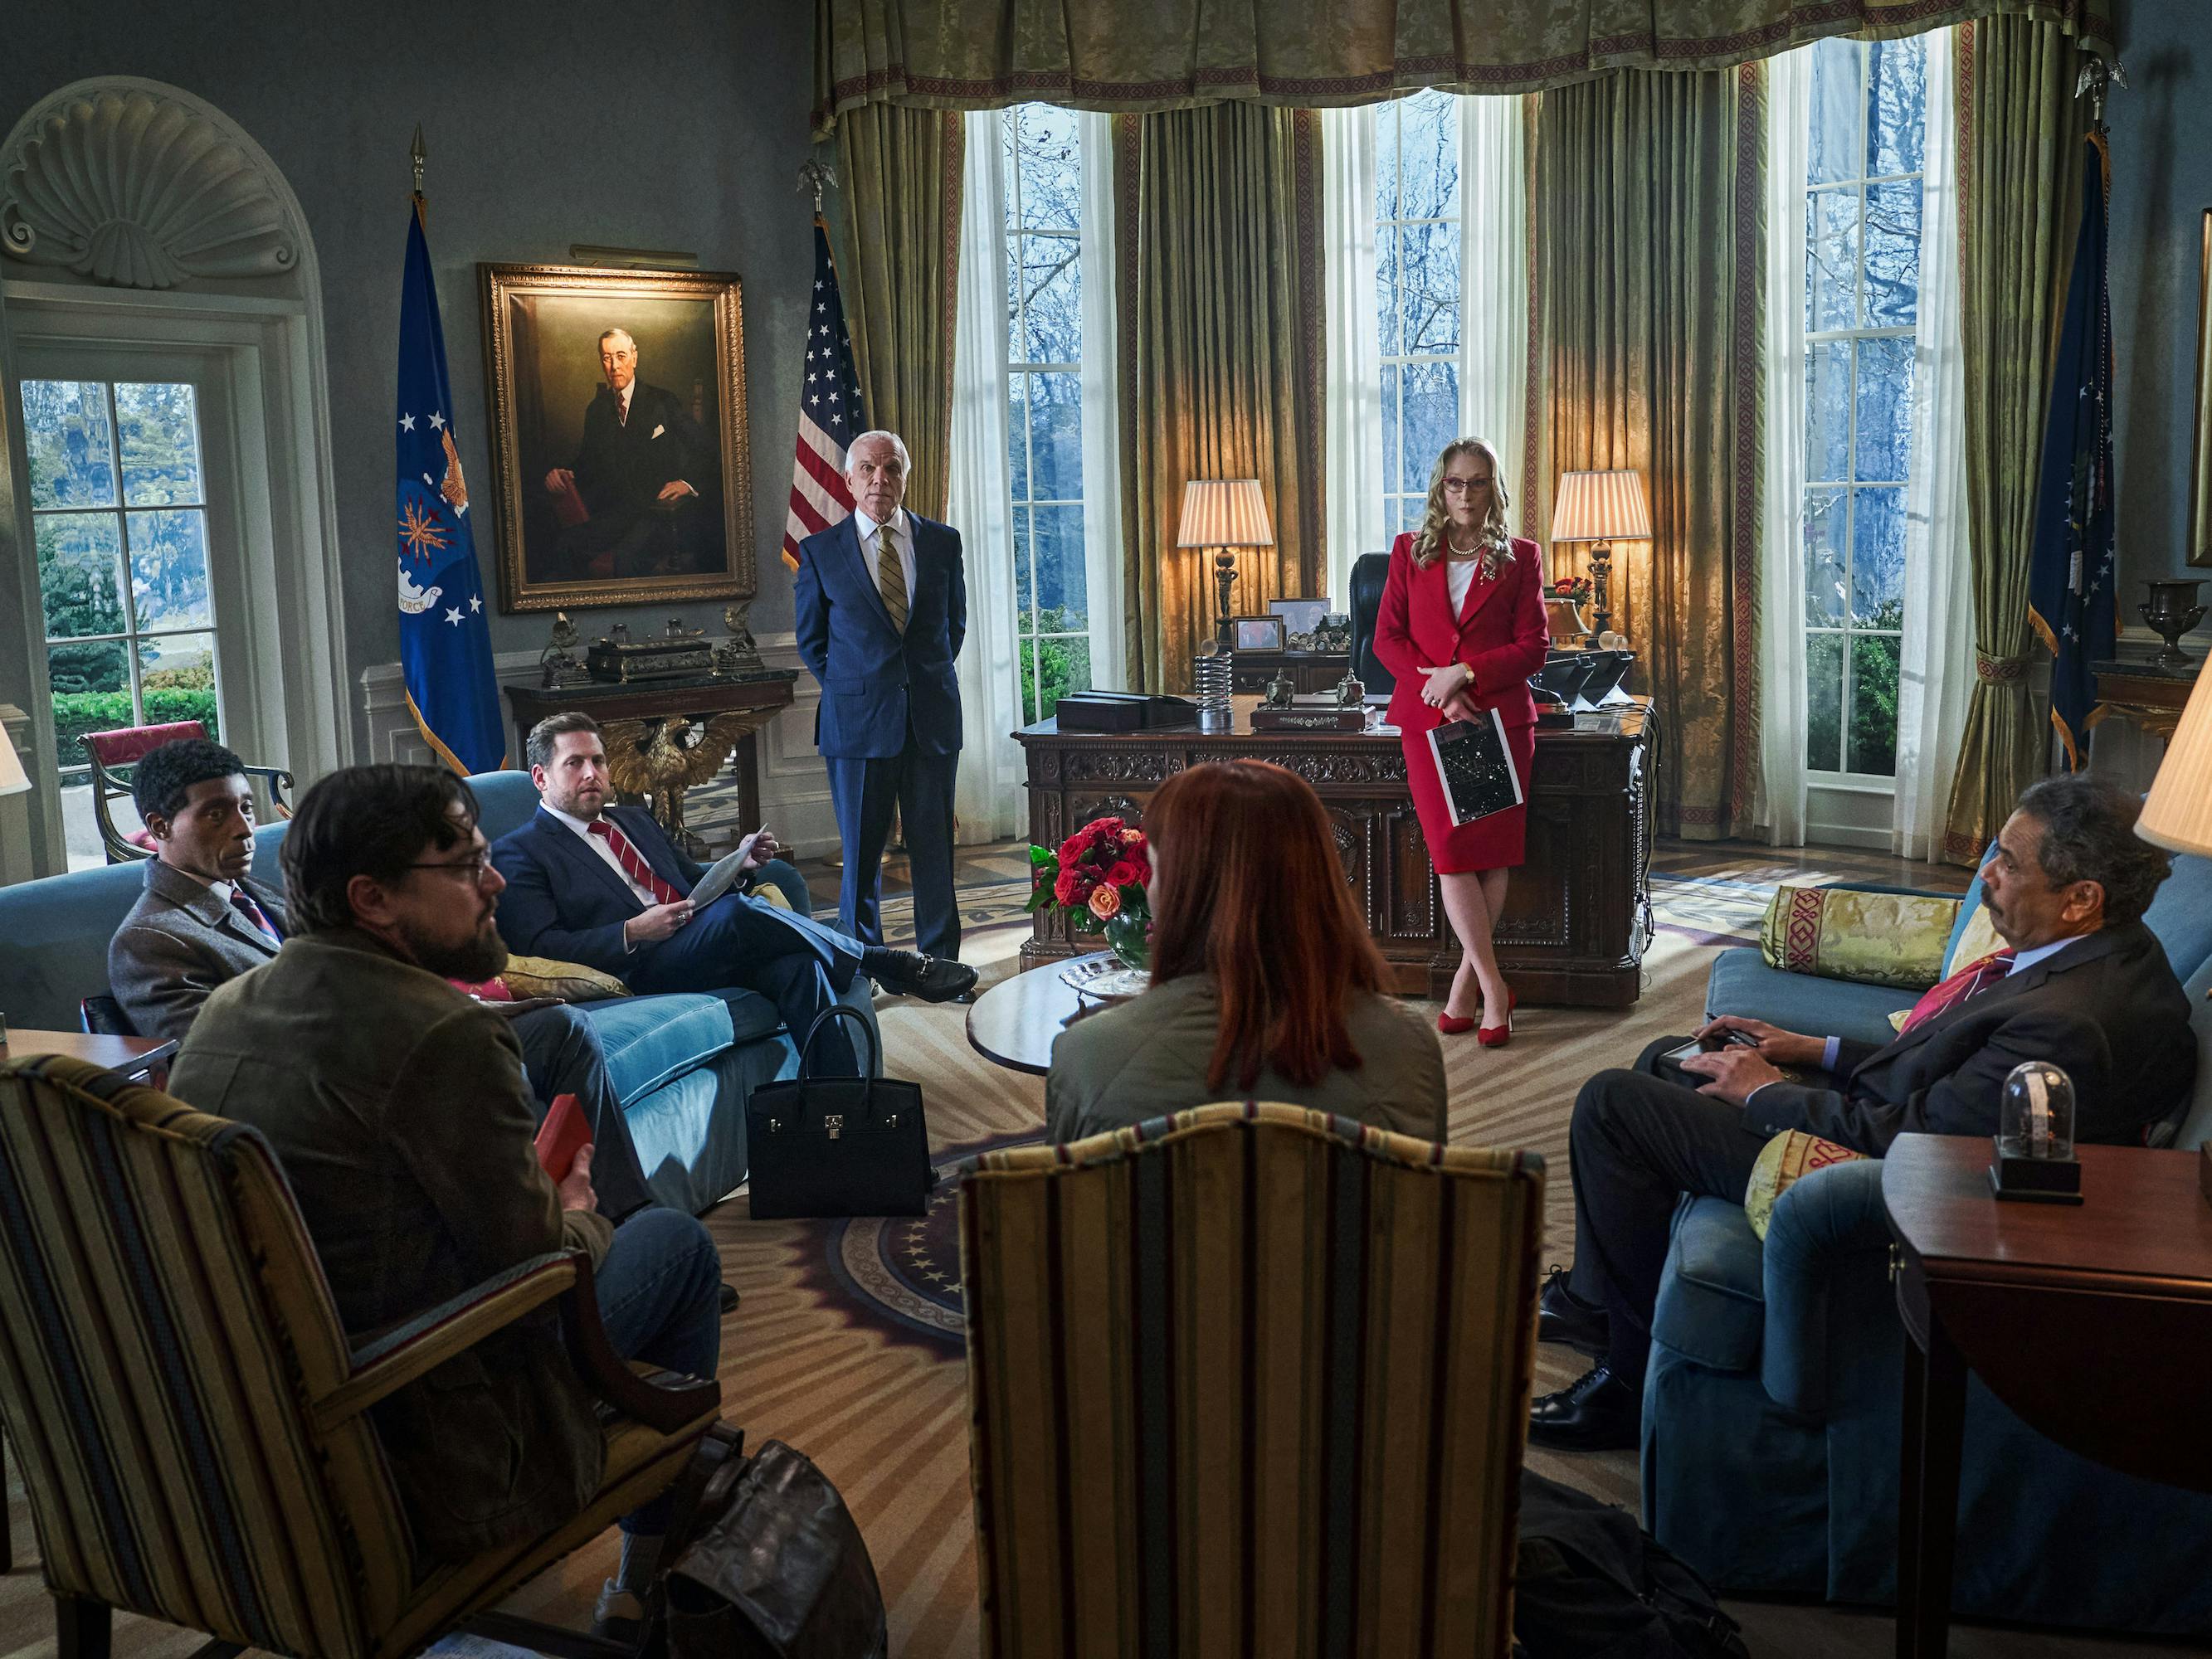 Rob Morgan, Leonardo DiCaprio, Jonah Hill, Jennifer Lawrence, and Meryl Streep sit in the oval office. Morgan wears a grey suit. DiCaprio wears a green corduroy jacket. Hill wears a navy suit with a black Birkin at his feet. Lawrence wears a green top, but only her bright red hair is visible. Streep wears a fabulous red skirt suit with matching heels. 